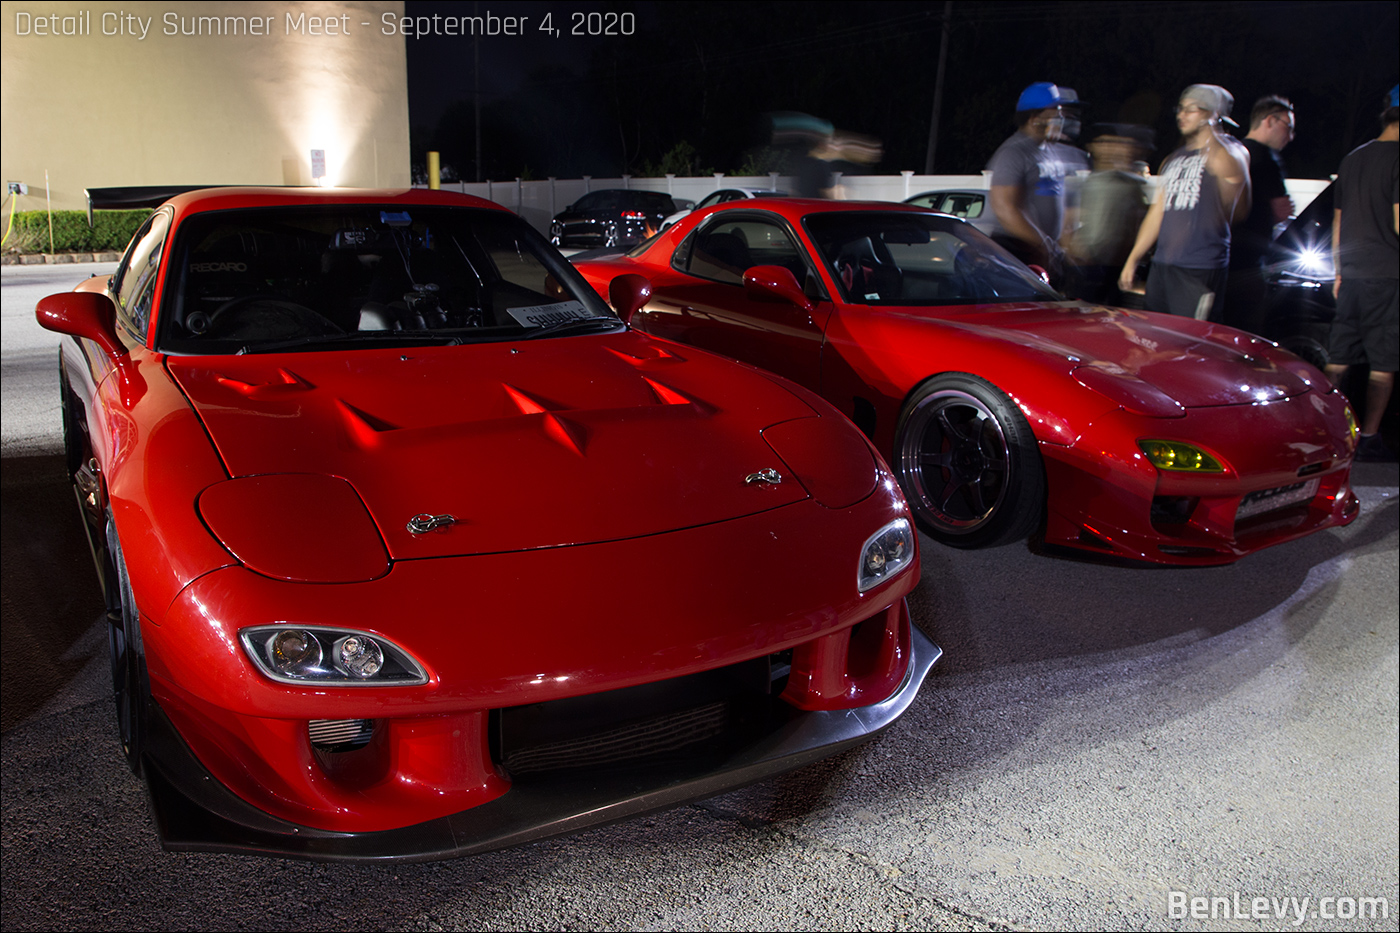 Two Red FD Mazda RX-7s